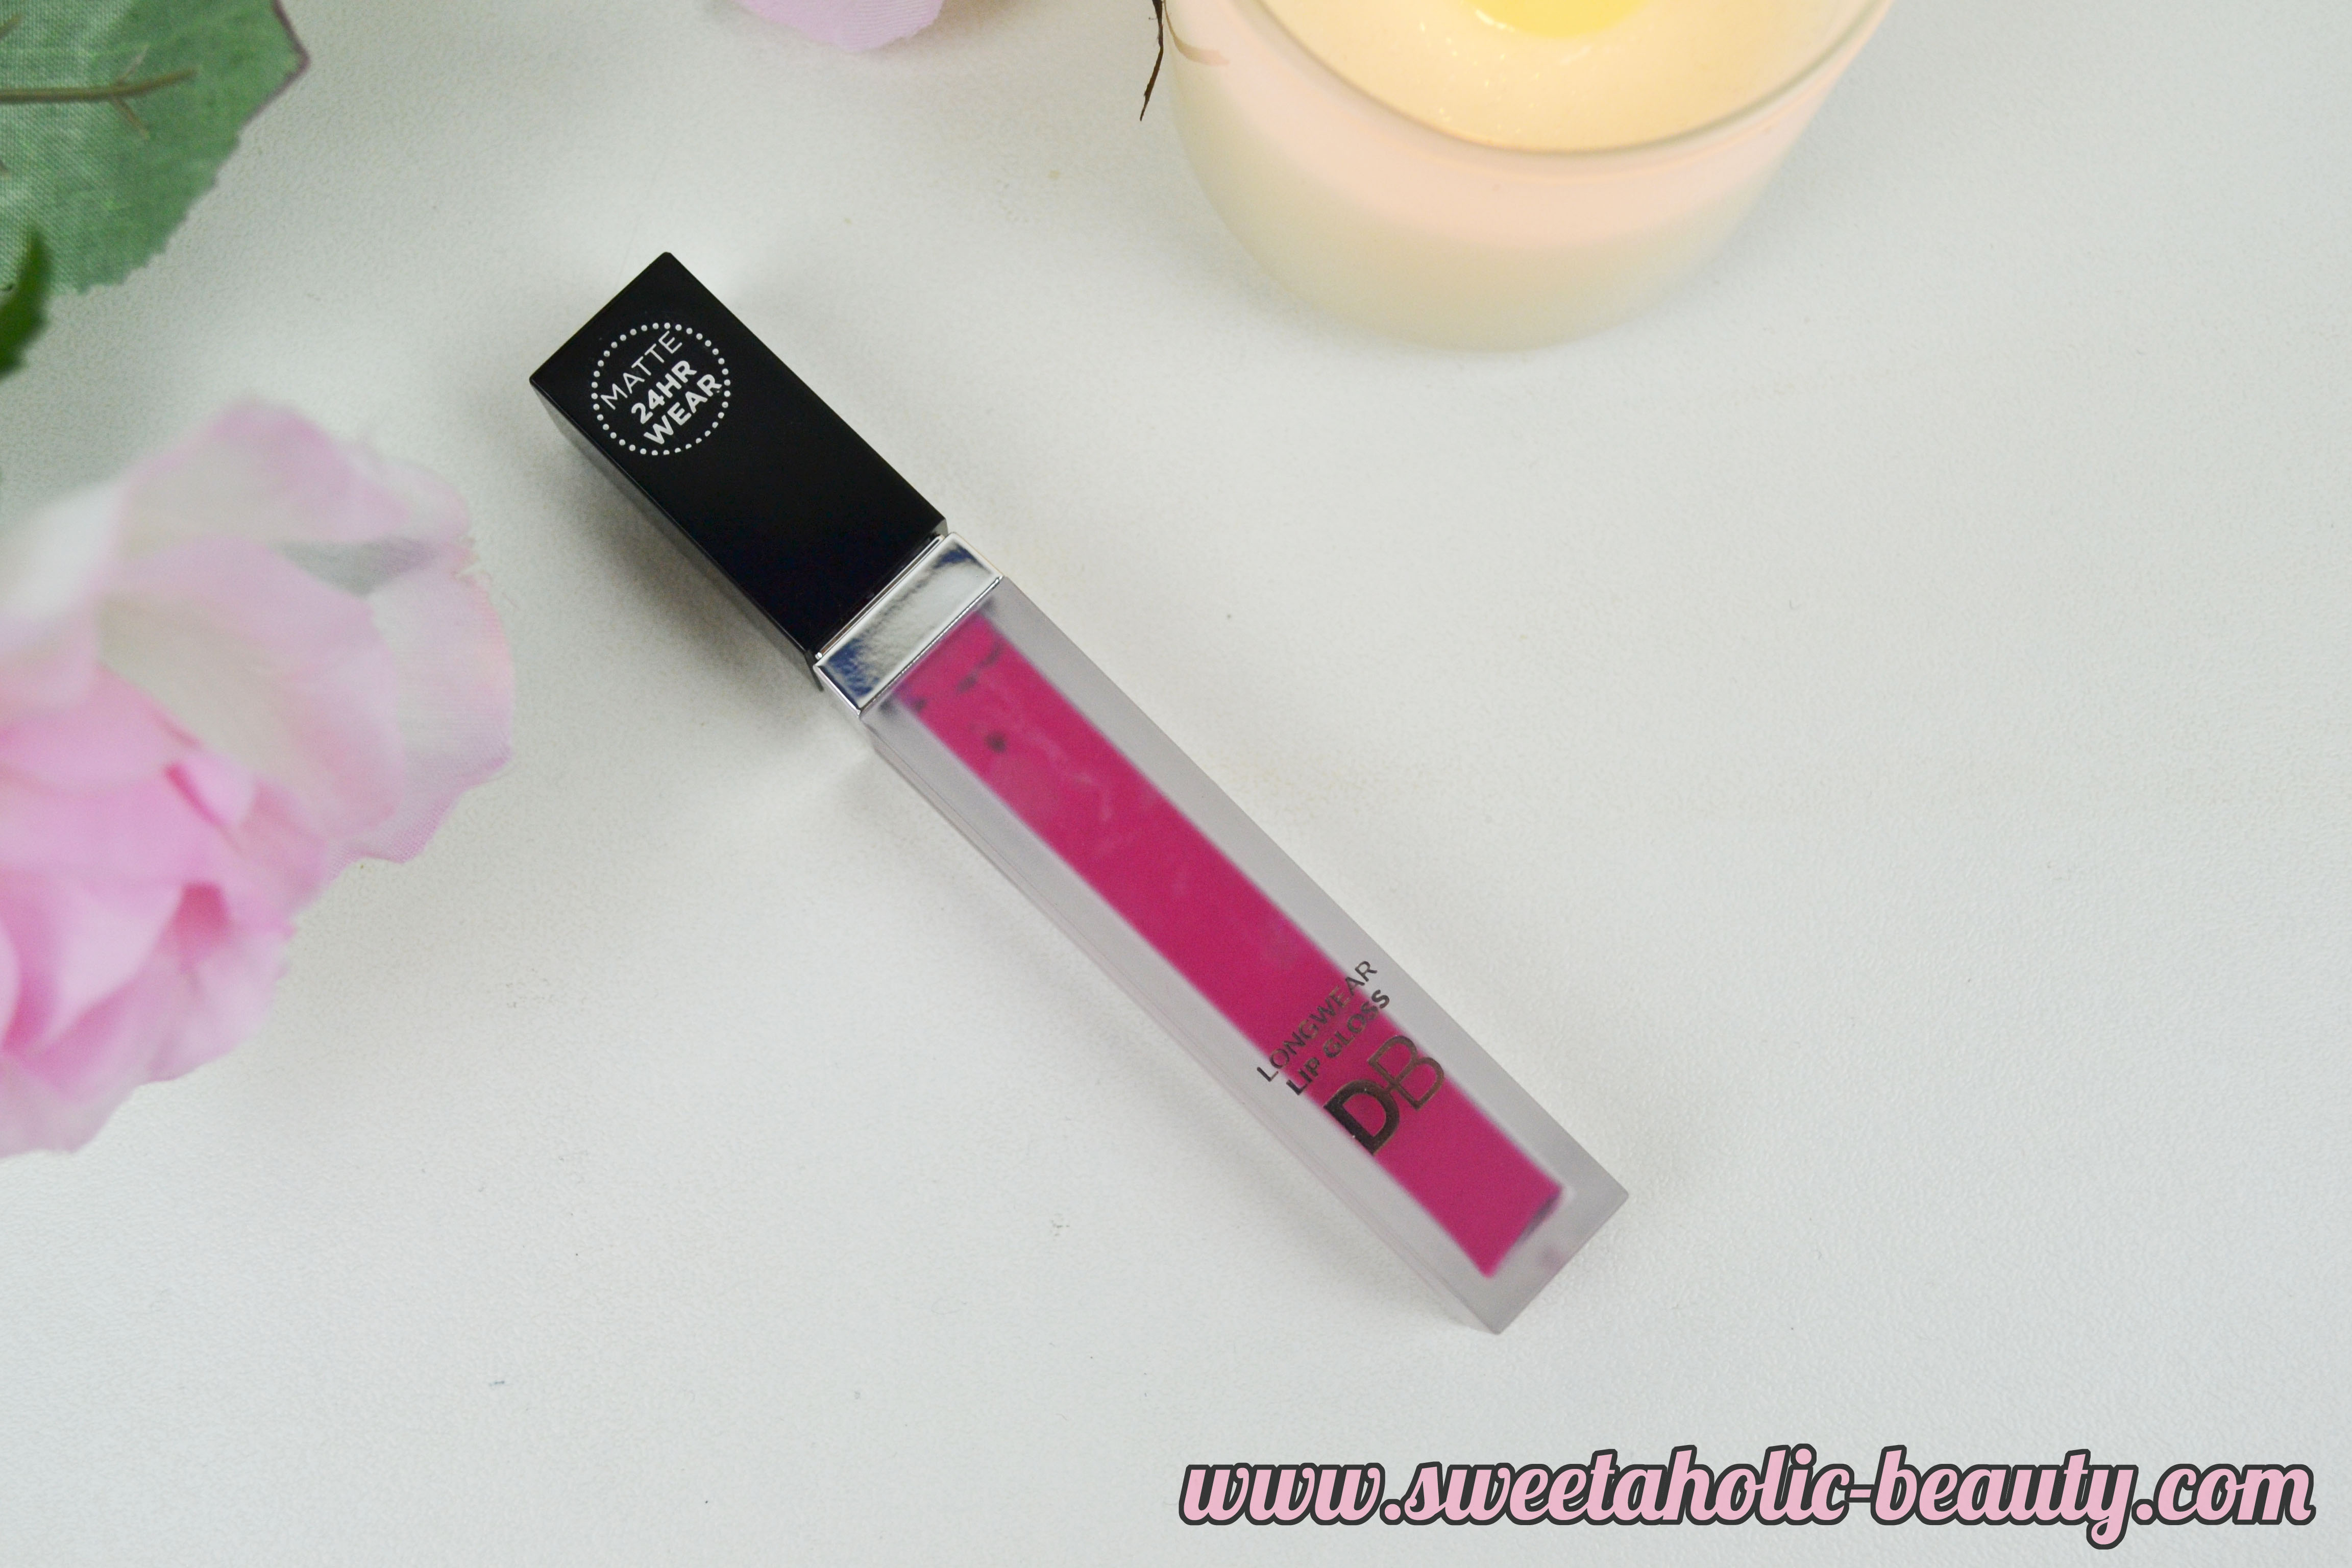 DB Cosmetics Brand Focus Review & Swatches - Sweetaholic Beauty